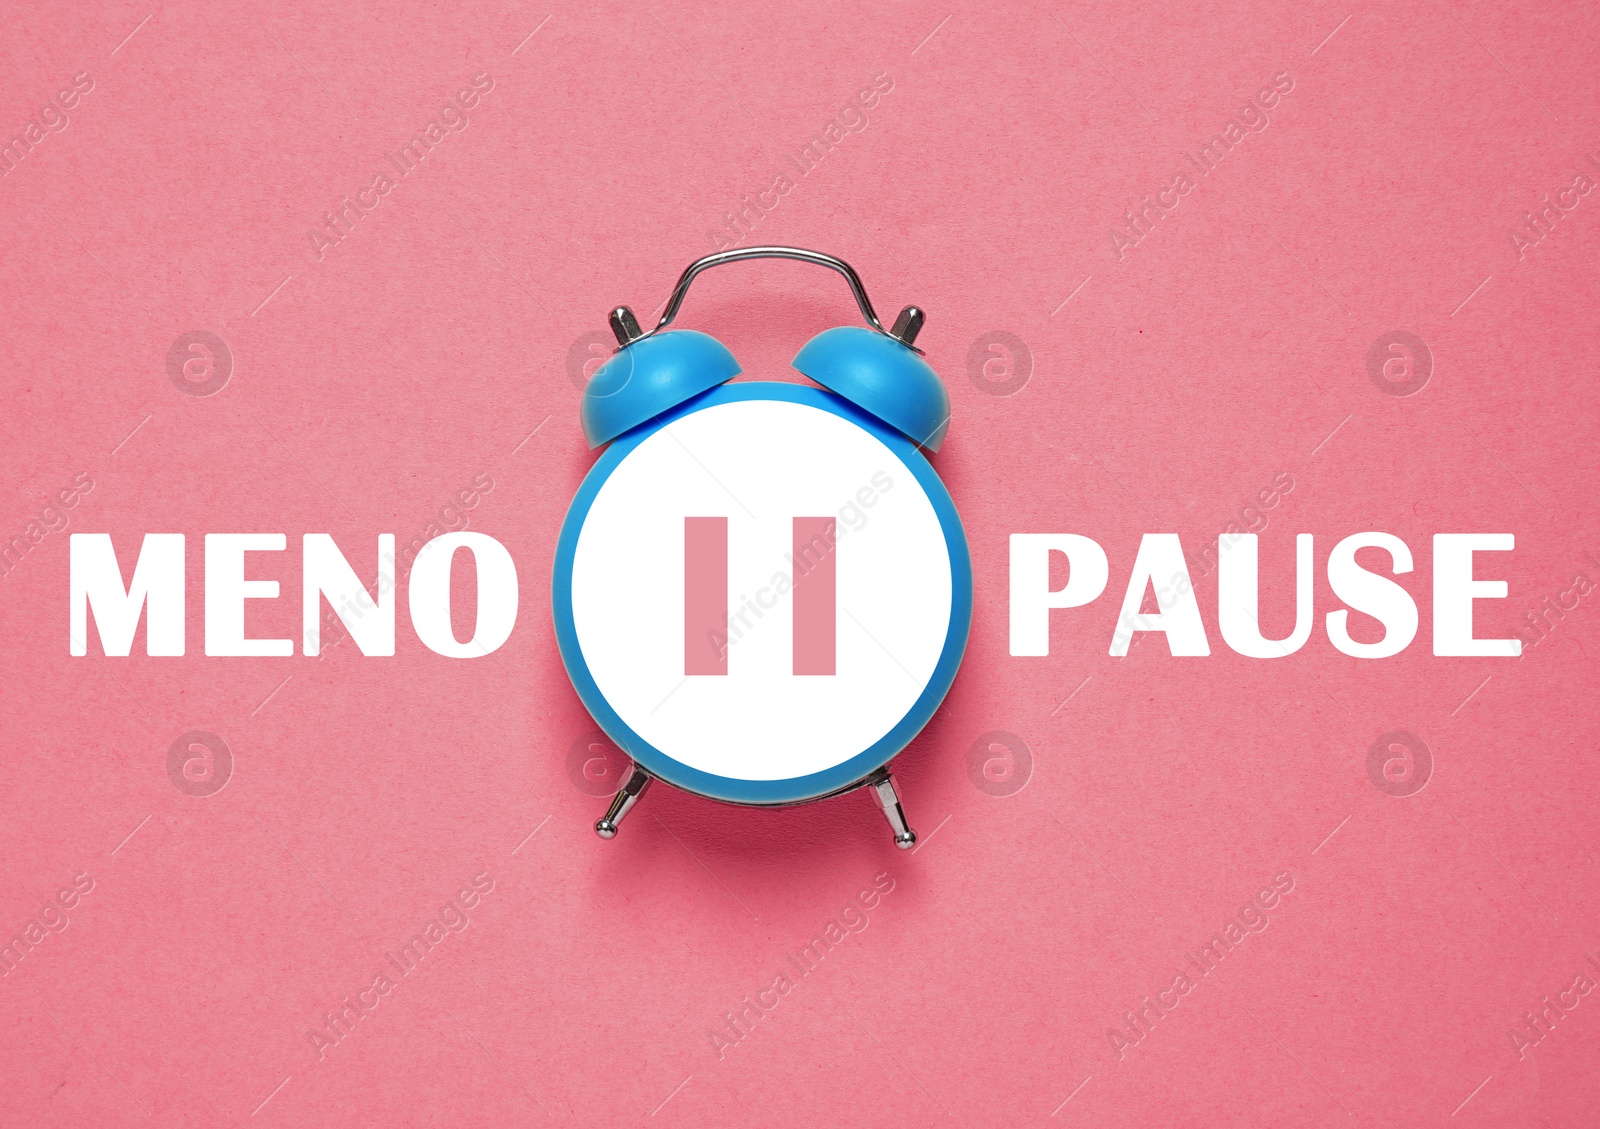 Image of Menopause word and alarm clock with pause symbol on coral background, top view